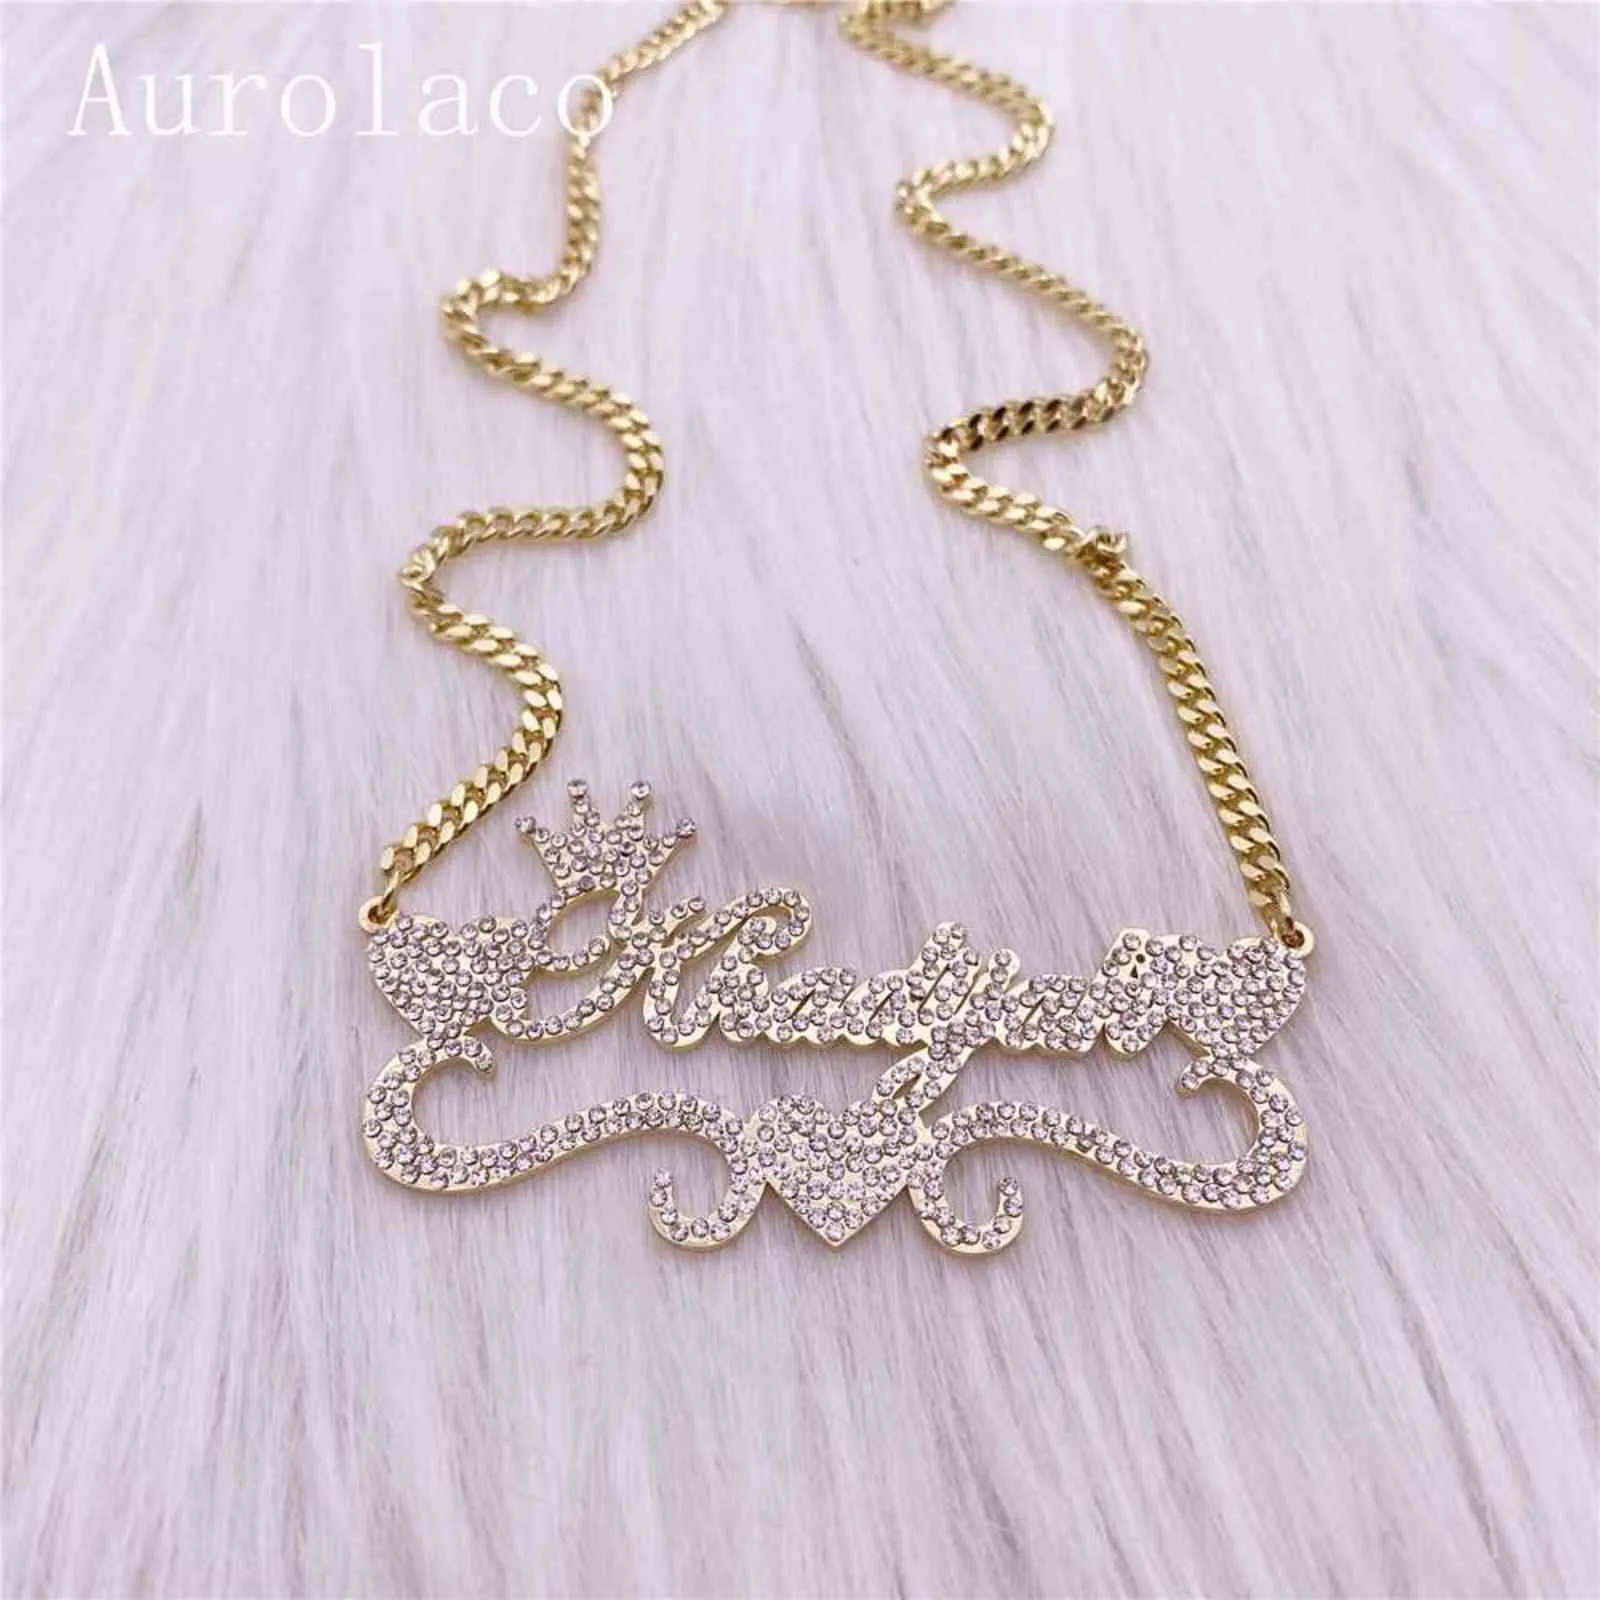 AurolaCo Custom Name Necklace with Diamond Custom Bling Name Necklace Stainless Steel Gold Nameplate Necklace For Women Gift 211117868872